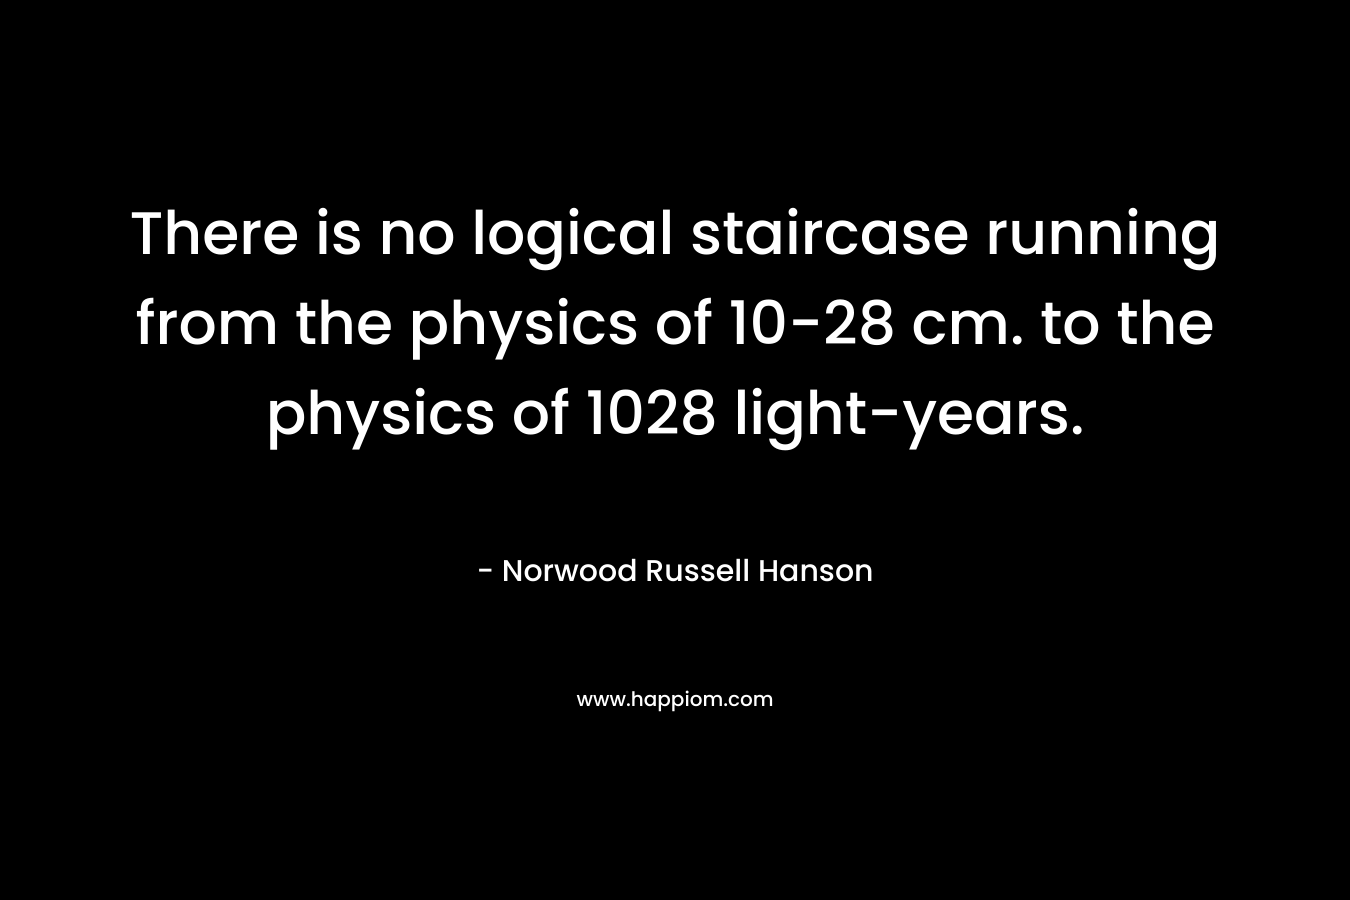 There is no logical staircase running from the physics of 10-28 cm. to the physics of 1028 light-years. – Norwood Russell Hanson